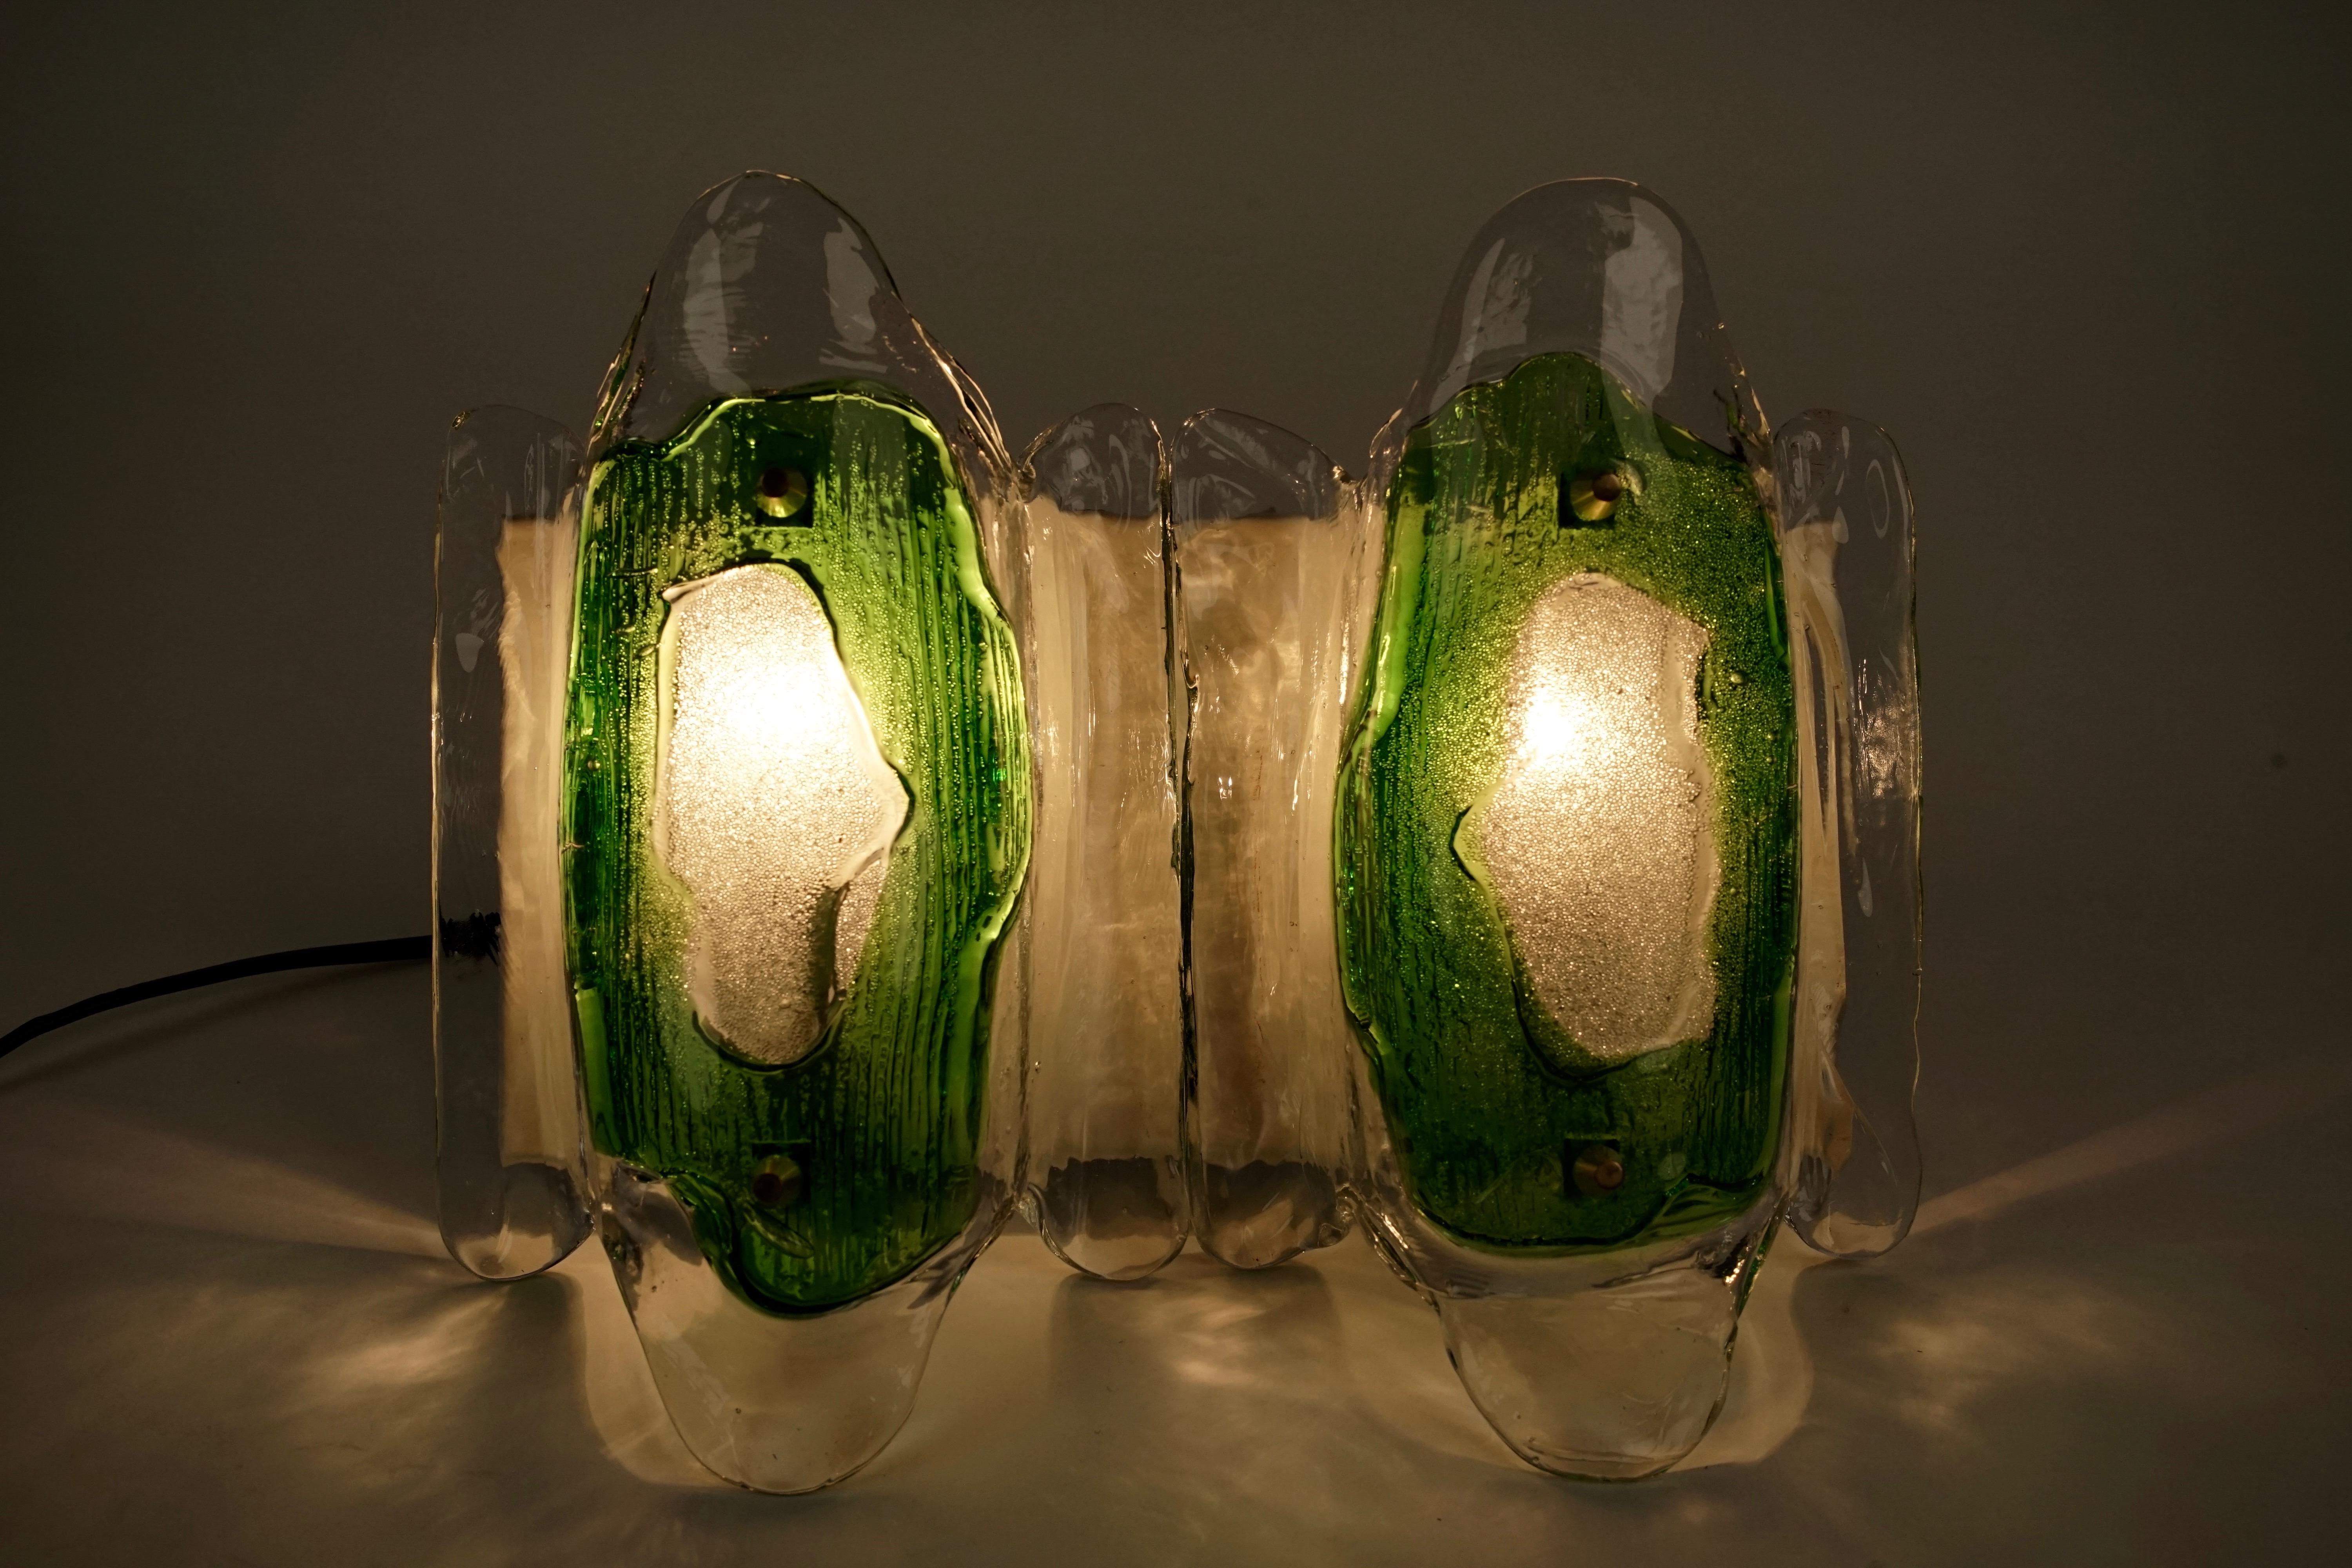 midcentury, modern, Austrian Glass wall lights manufactured at the end of the 1960s, beginning 1970s. The glass has been individually formed by Slumping in the oven to create unique bi-colored green and clear glass elements. The glass was produced